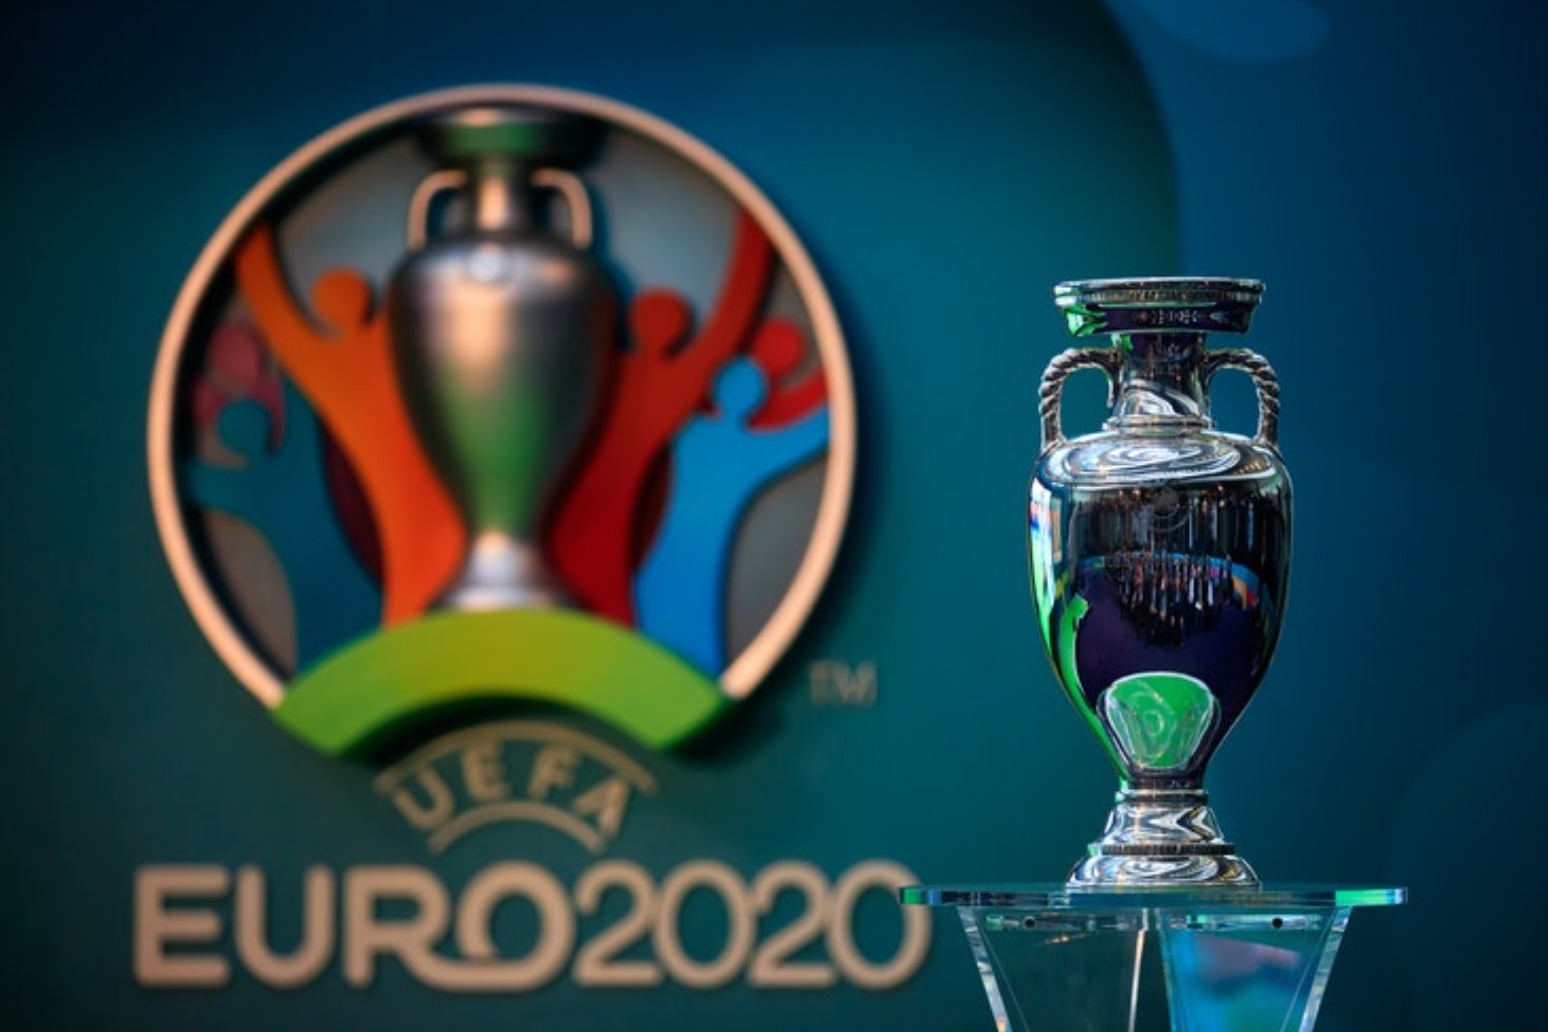 UEFA not planning changes to format or venues for next year’s Euro 2020 